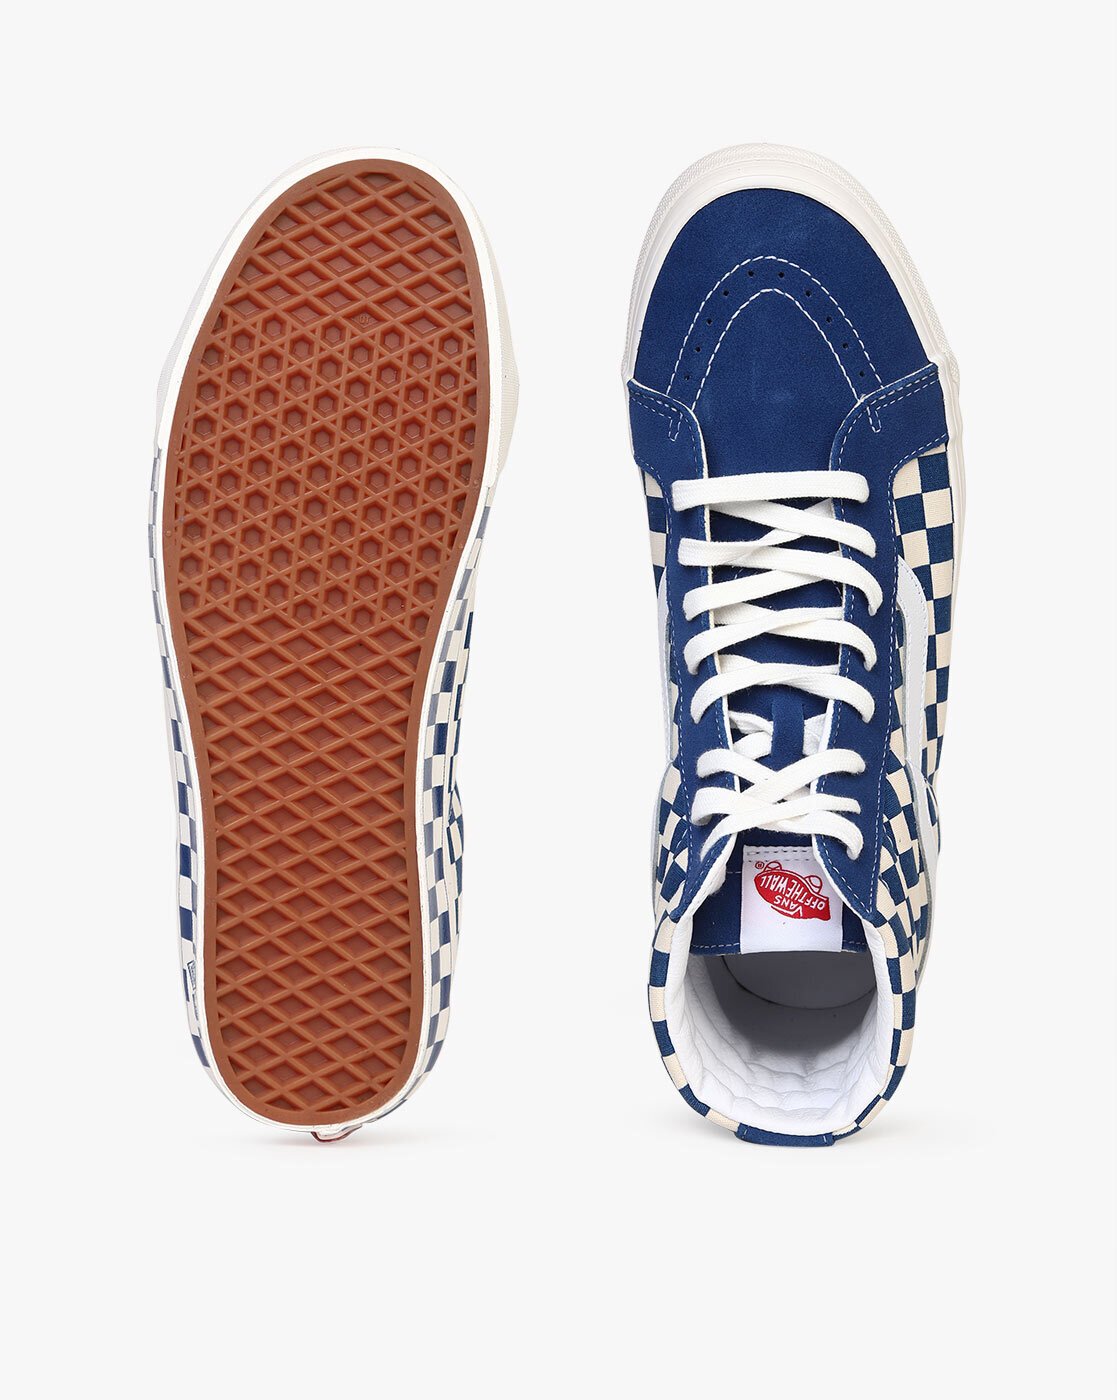 SK8-Hi 38 DX Checked Lace-Up Casual Shoes-Vn0a38gf2u81